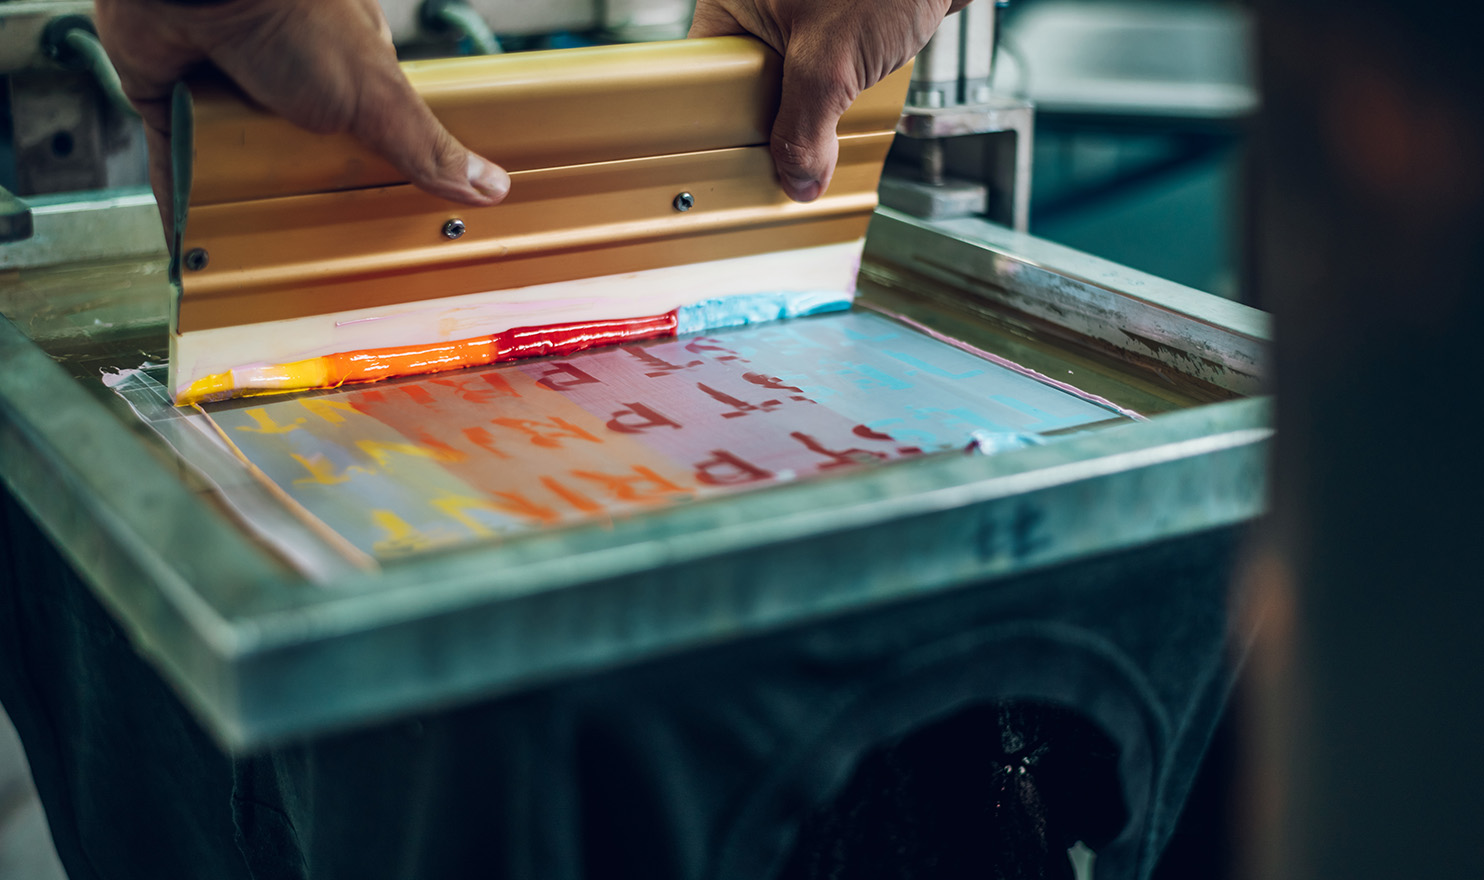 A close-up shot of an artist using teal, red, orange, and yellow ink to screen print a design onto a fabric object.